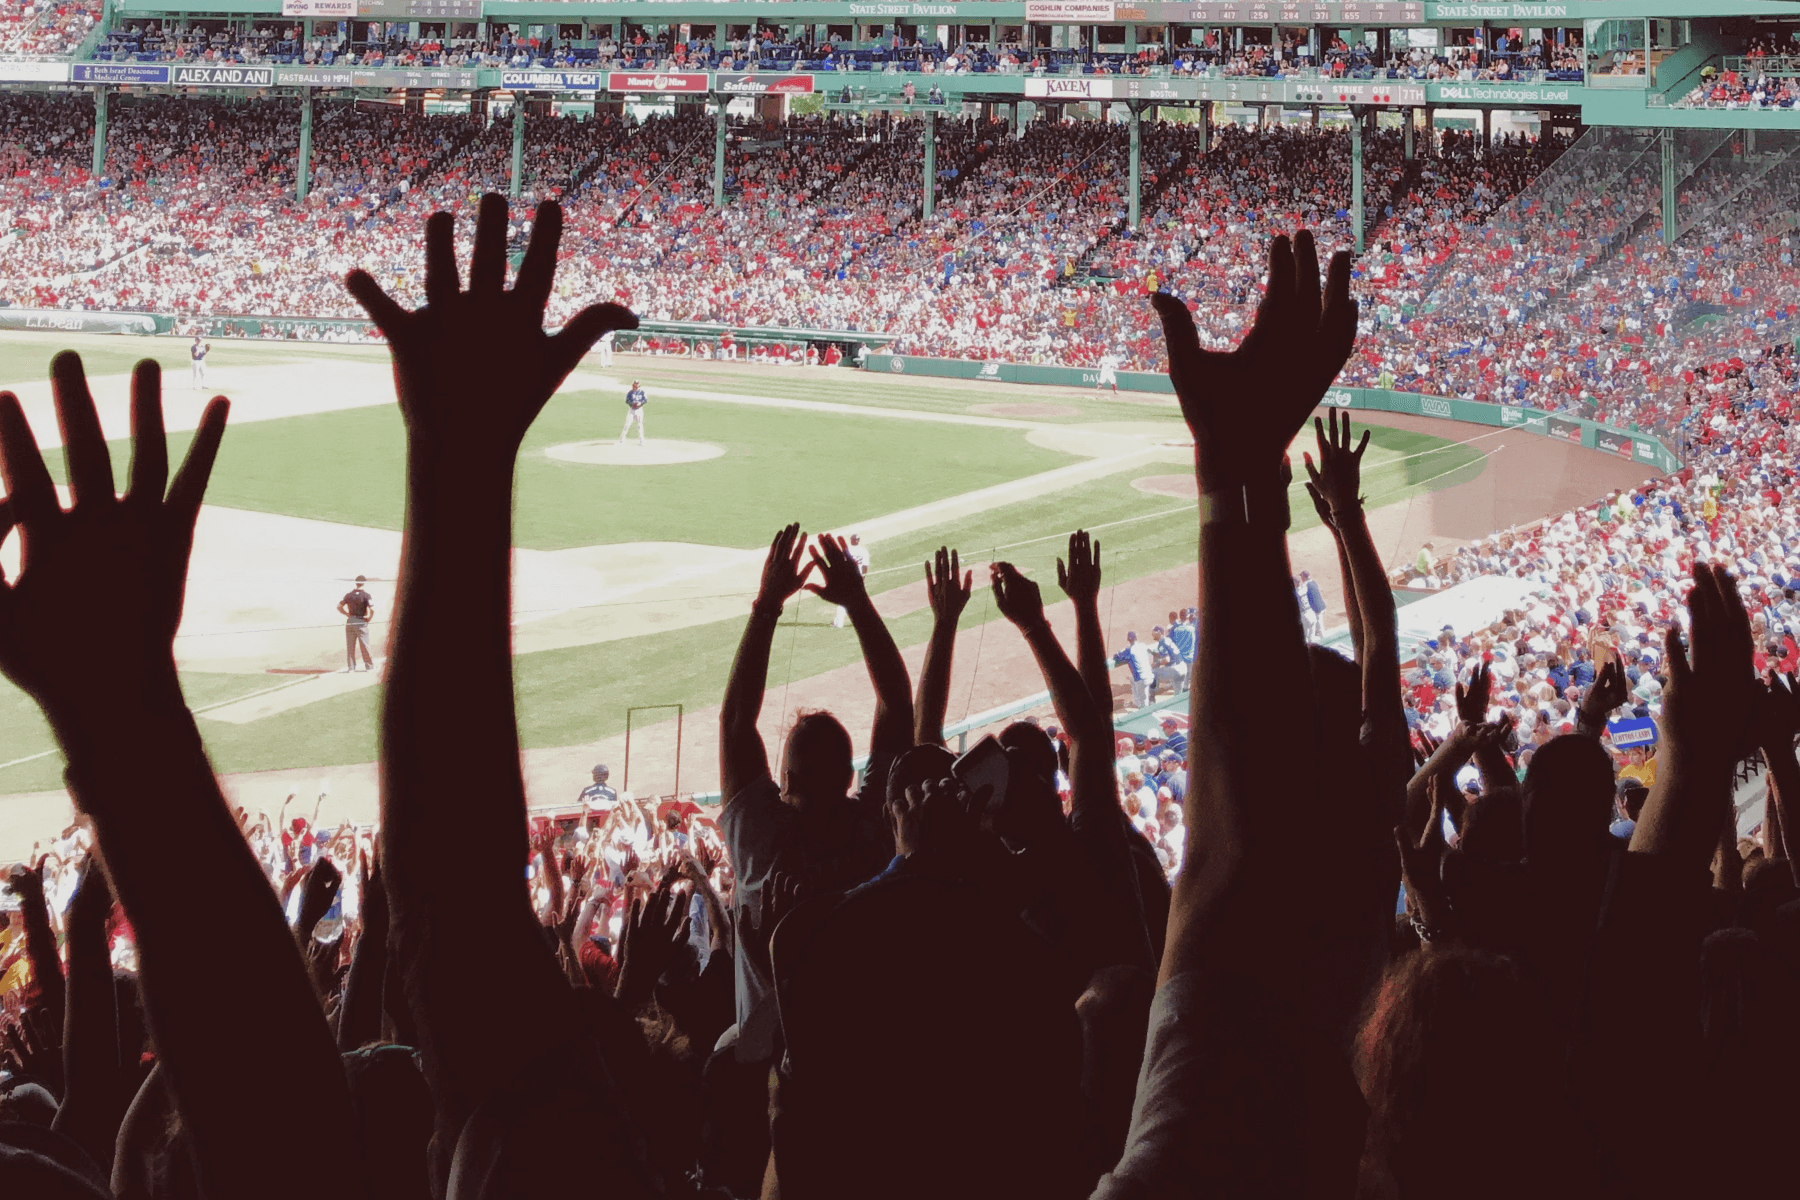 A view of people cheering at a baseball stadium from behind.